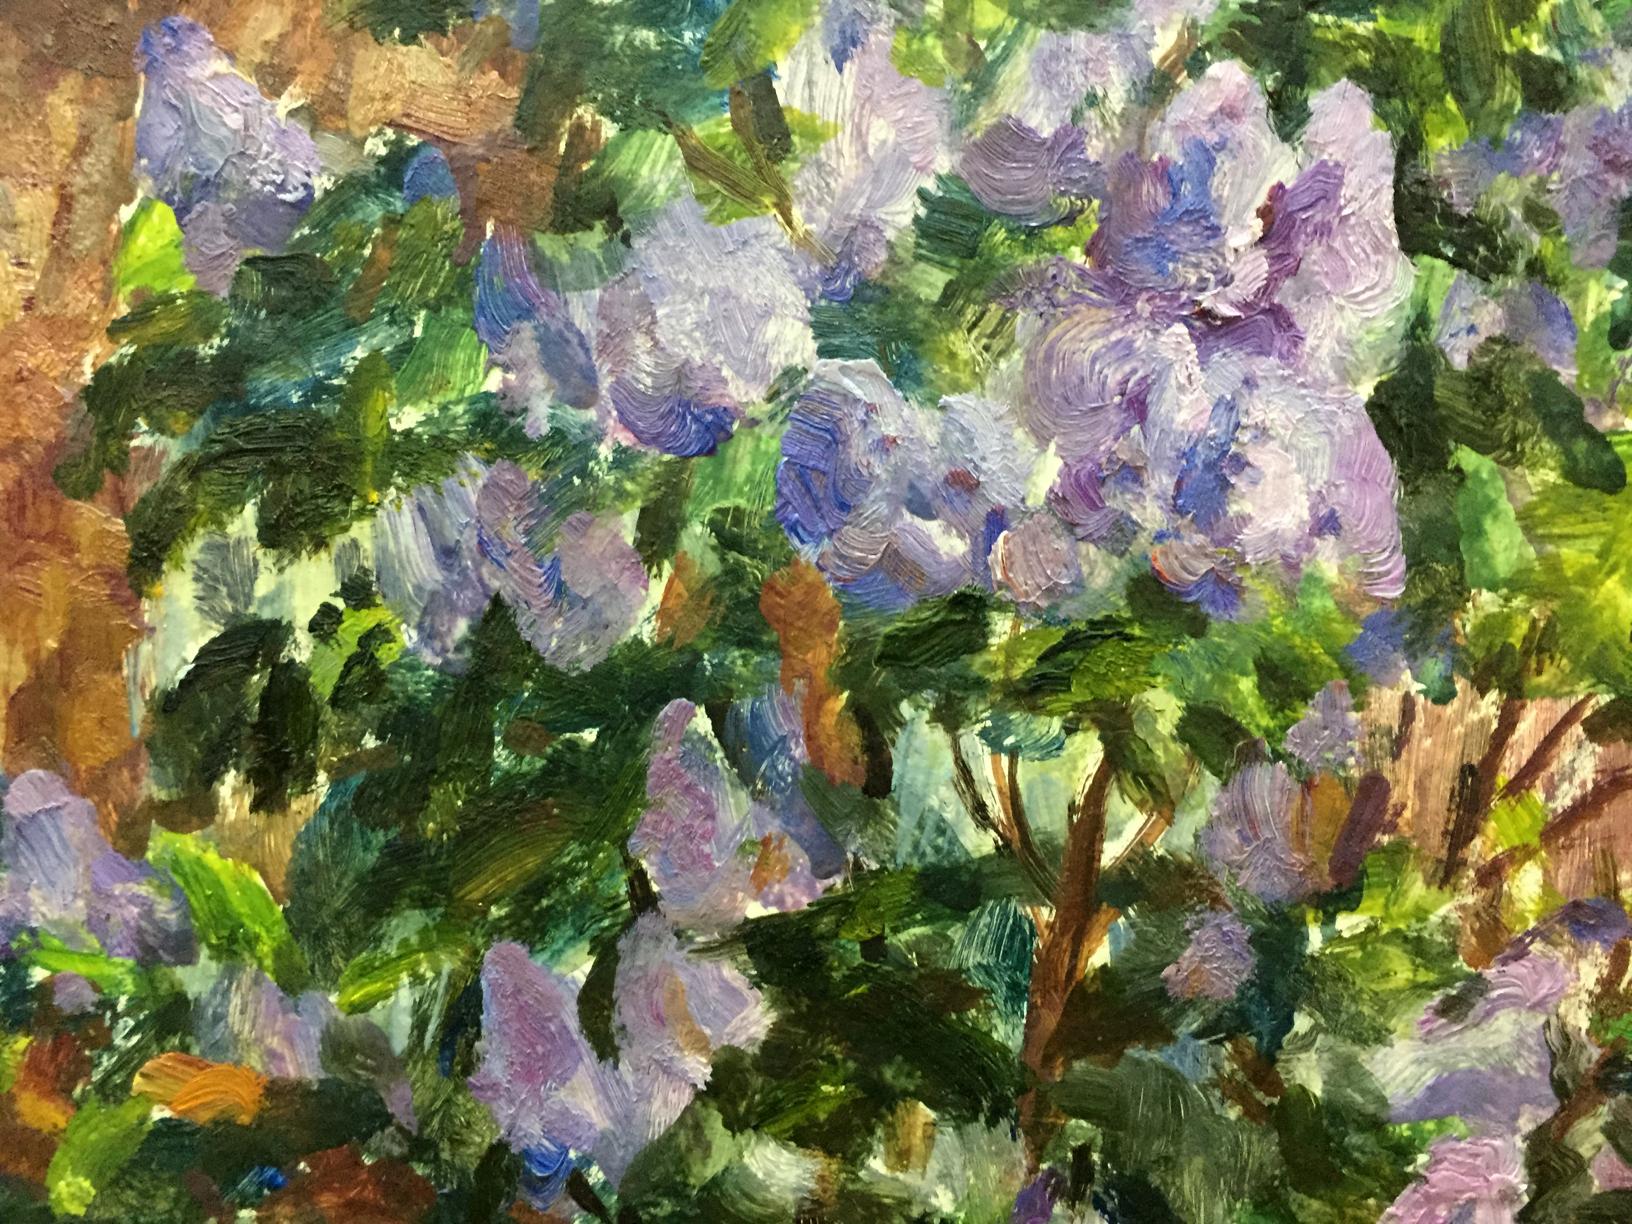 Lilac bush near Ivan Feodosievich Dziuban's home depicted in oil painting